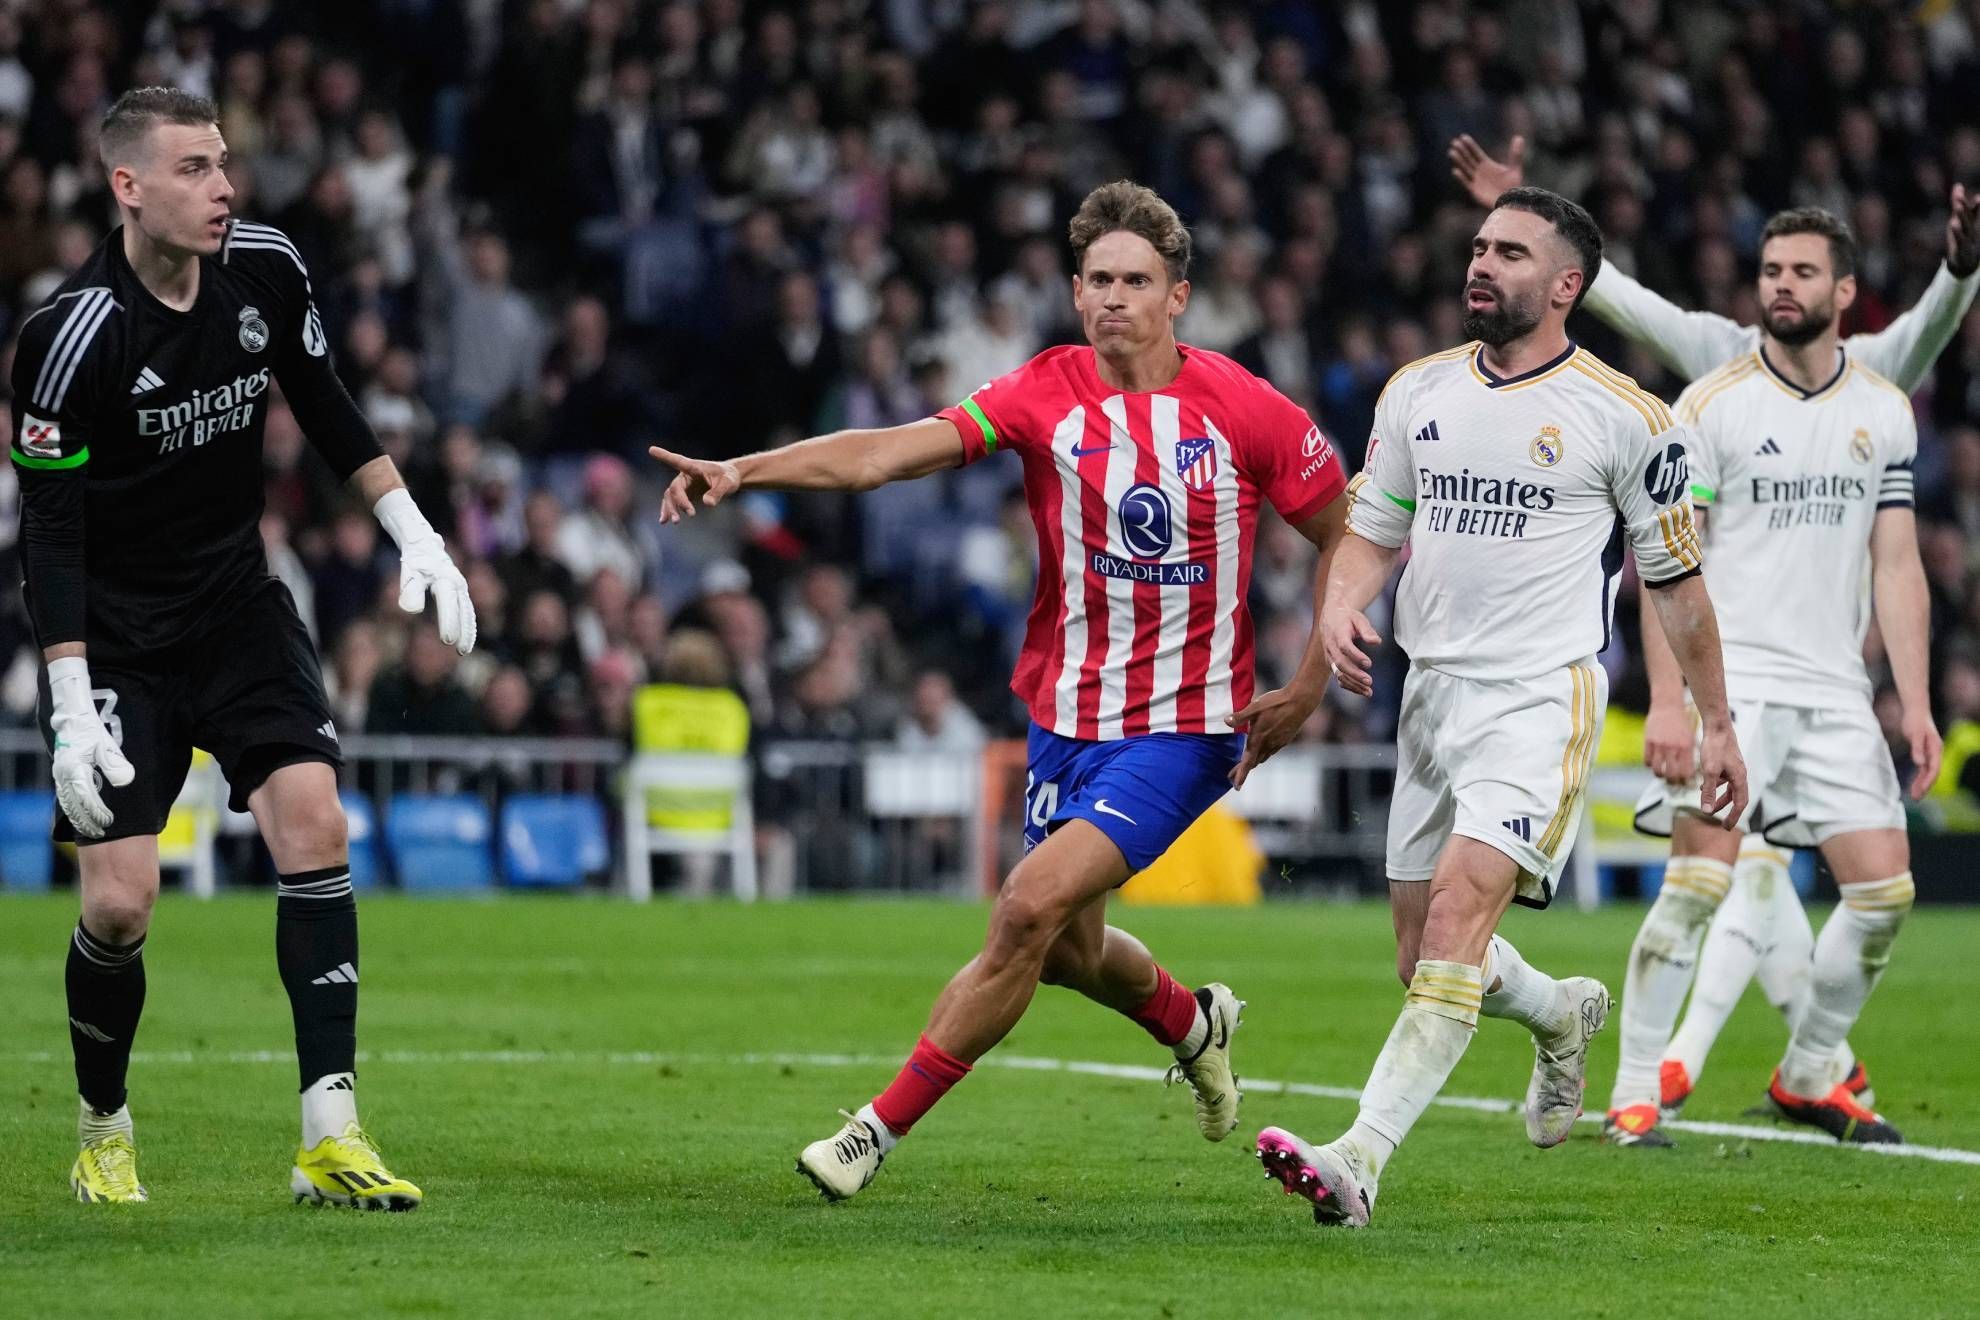 COLUMN: The 4th derby, Real Madrid’s weakness and Diego Simeone’s philosophical betrayal in 4 takeaways